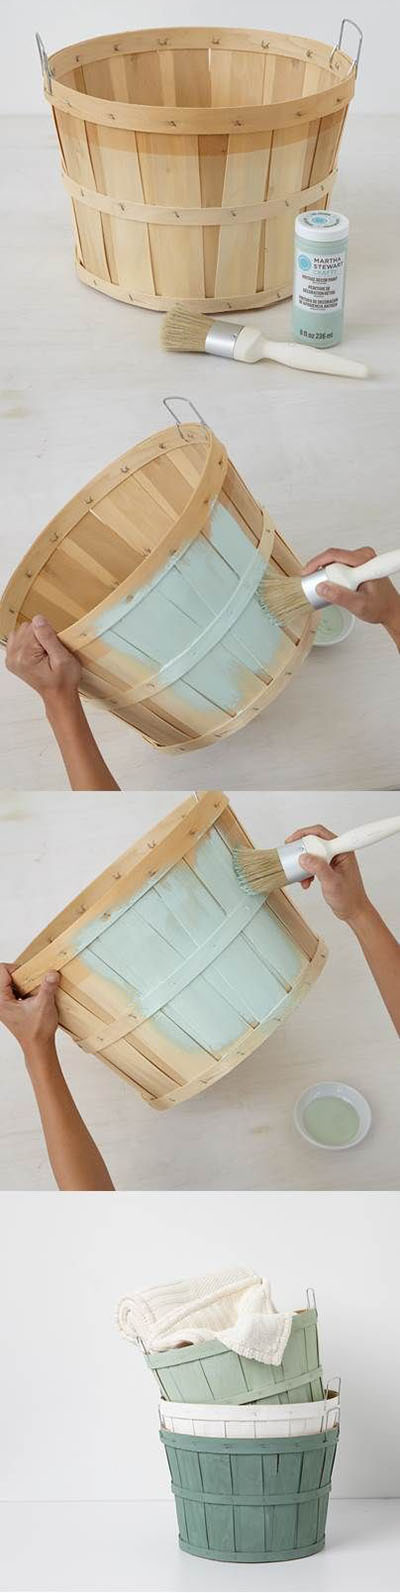 2 Customize orchard baskets with Vintage Decor Paint bcef